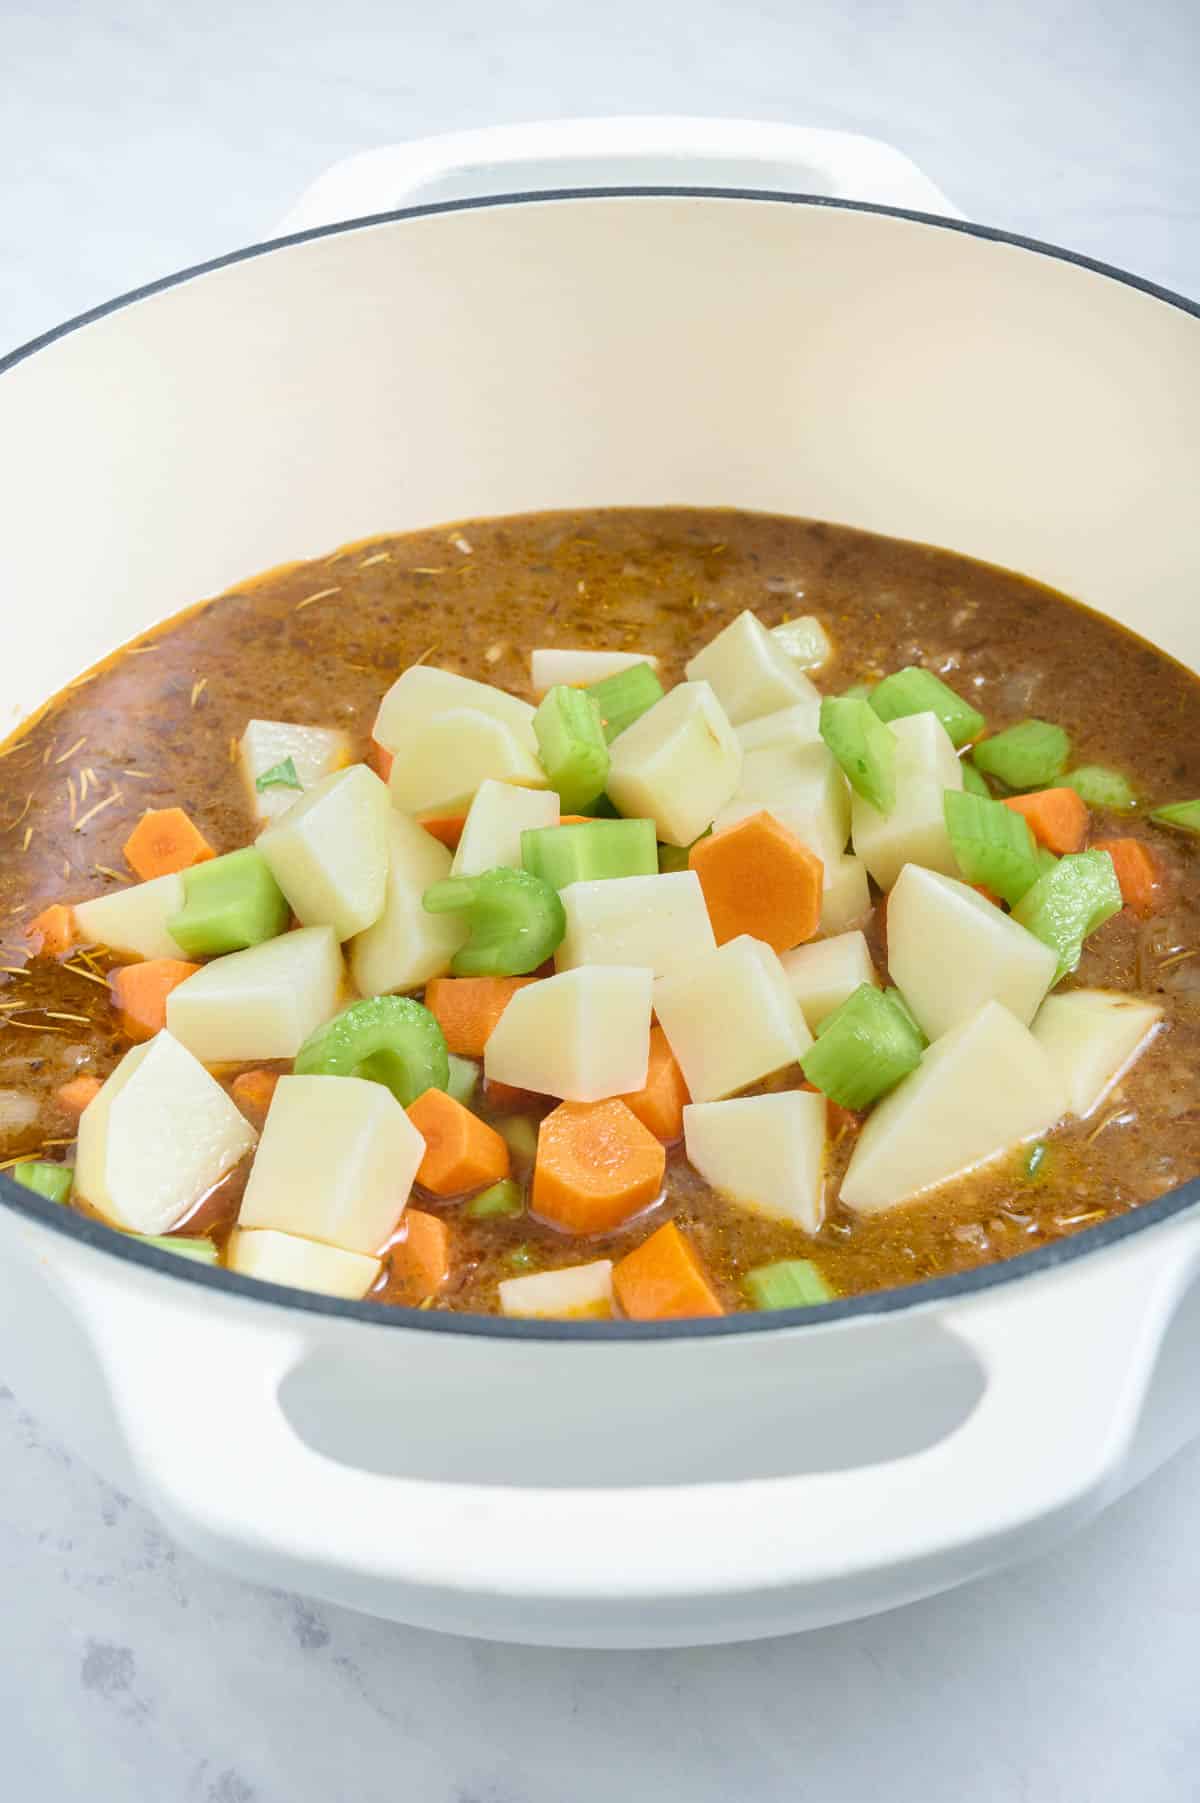 Chopped veggies are added to the stew.